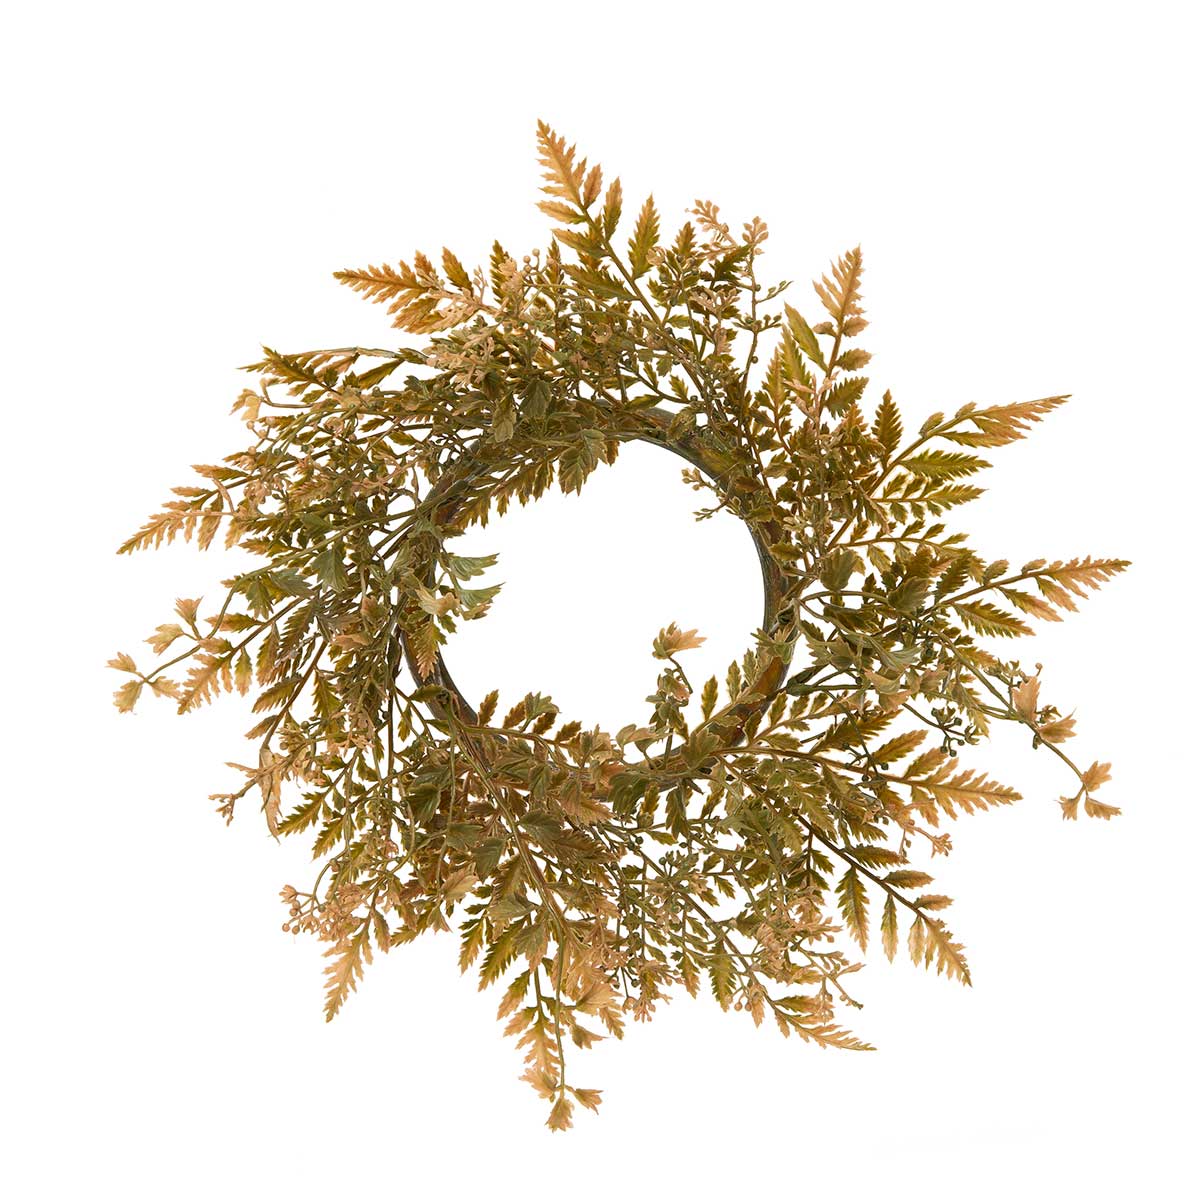 CANDLE RING FALL FERN 12IN (INNER RING 4.5IN)